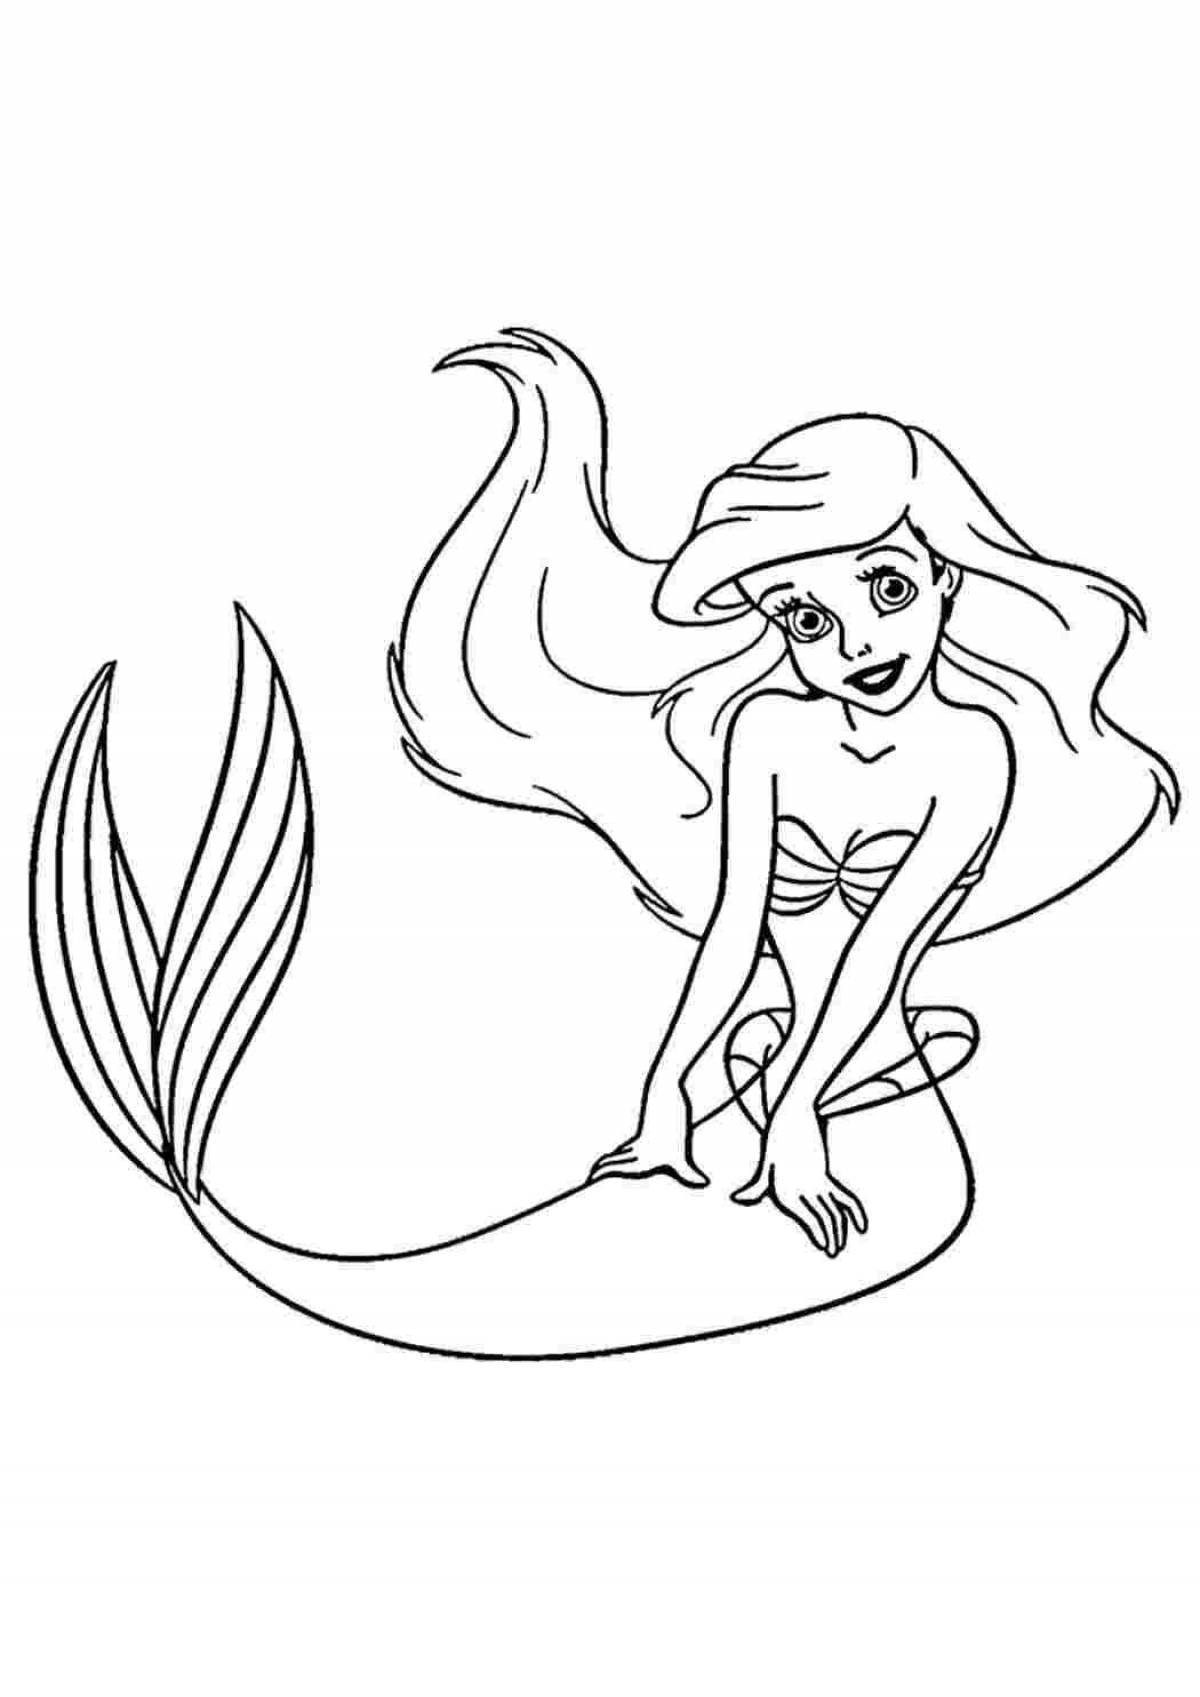 Fun coloring pages with mermaids for girls